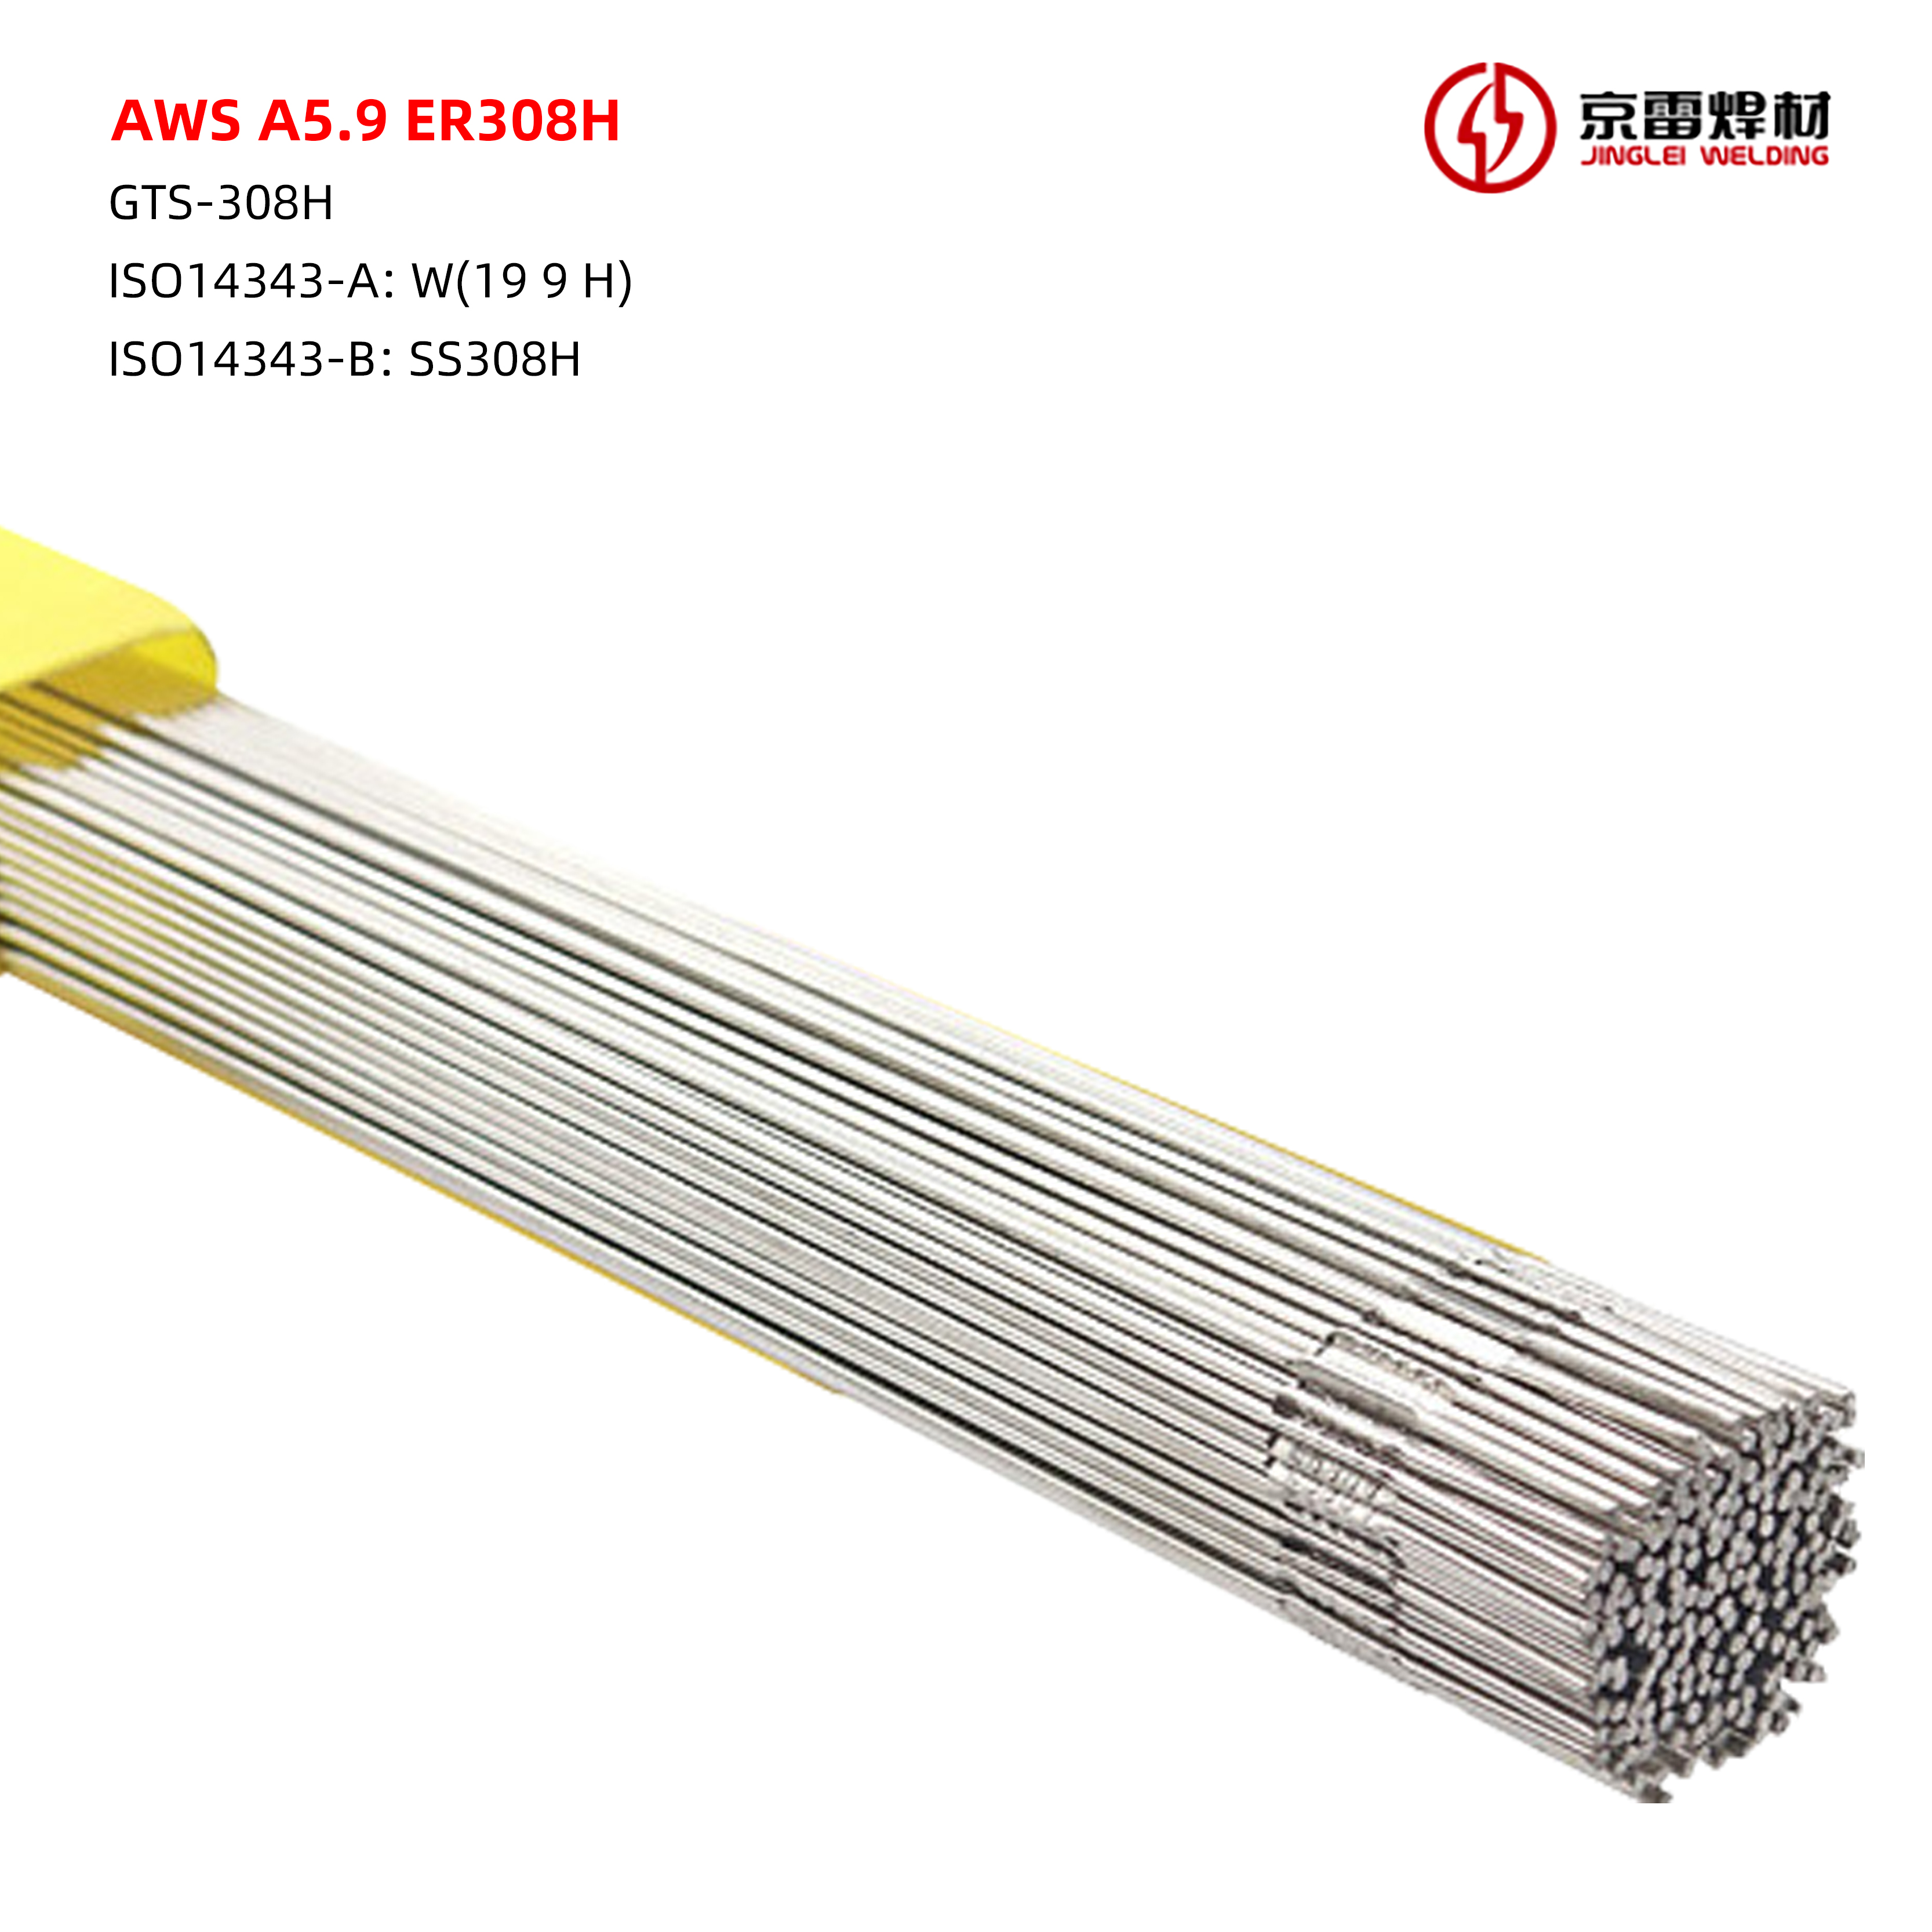 TIG Welding Wire For Stainless Steel ER308H duplex stainless steel chemical tanker weld